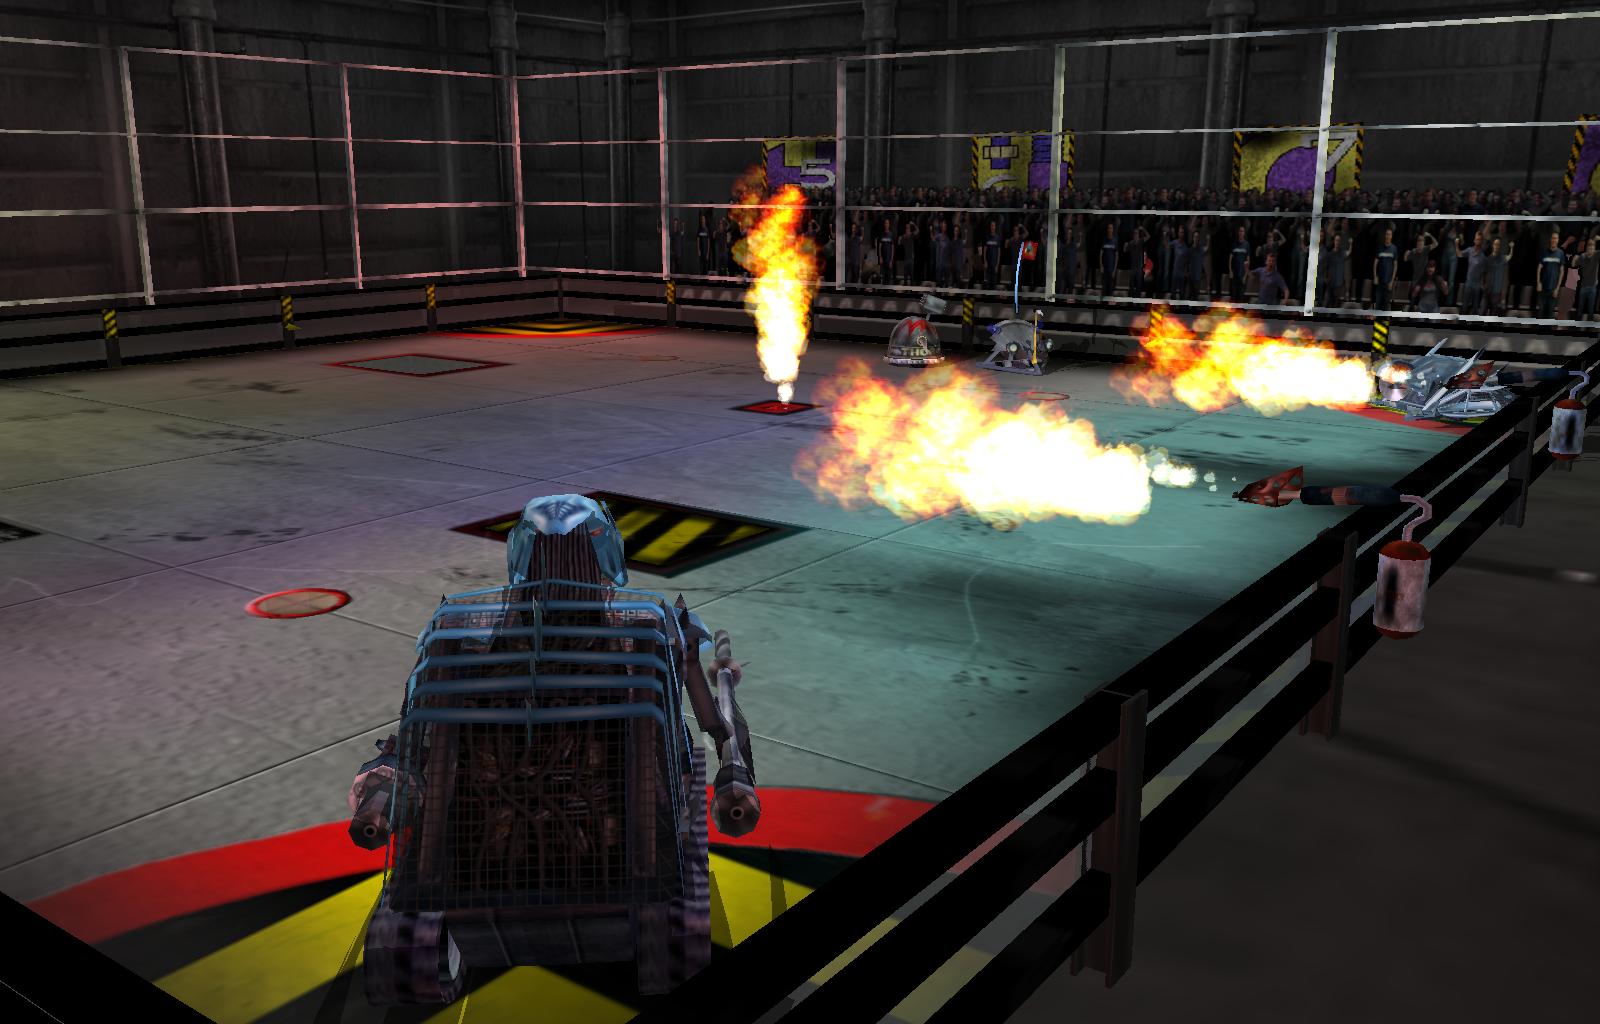 SUCCESSFULLY enabled the house robots in Robot Wars Arenas of Destruction